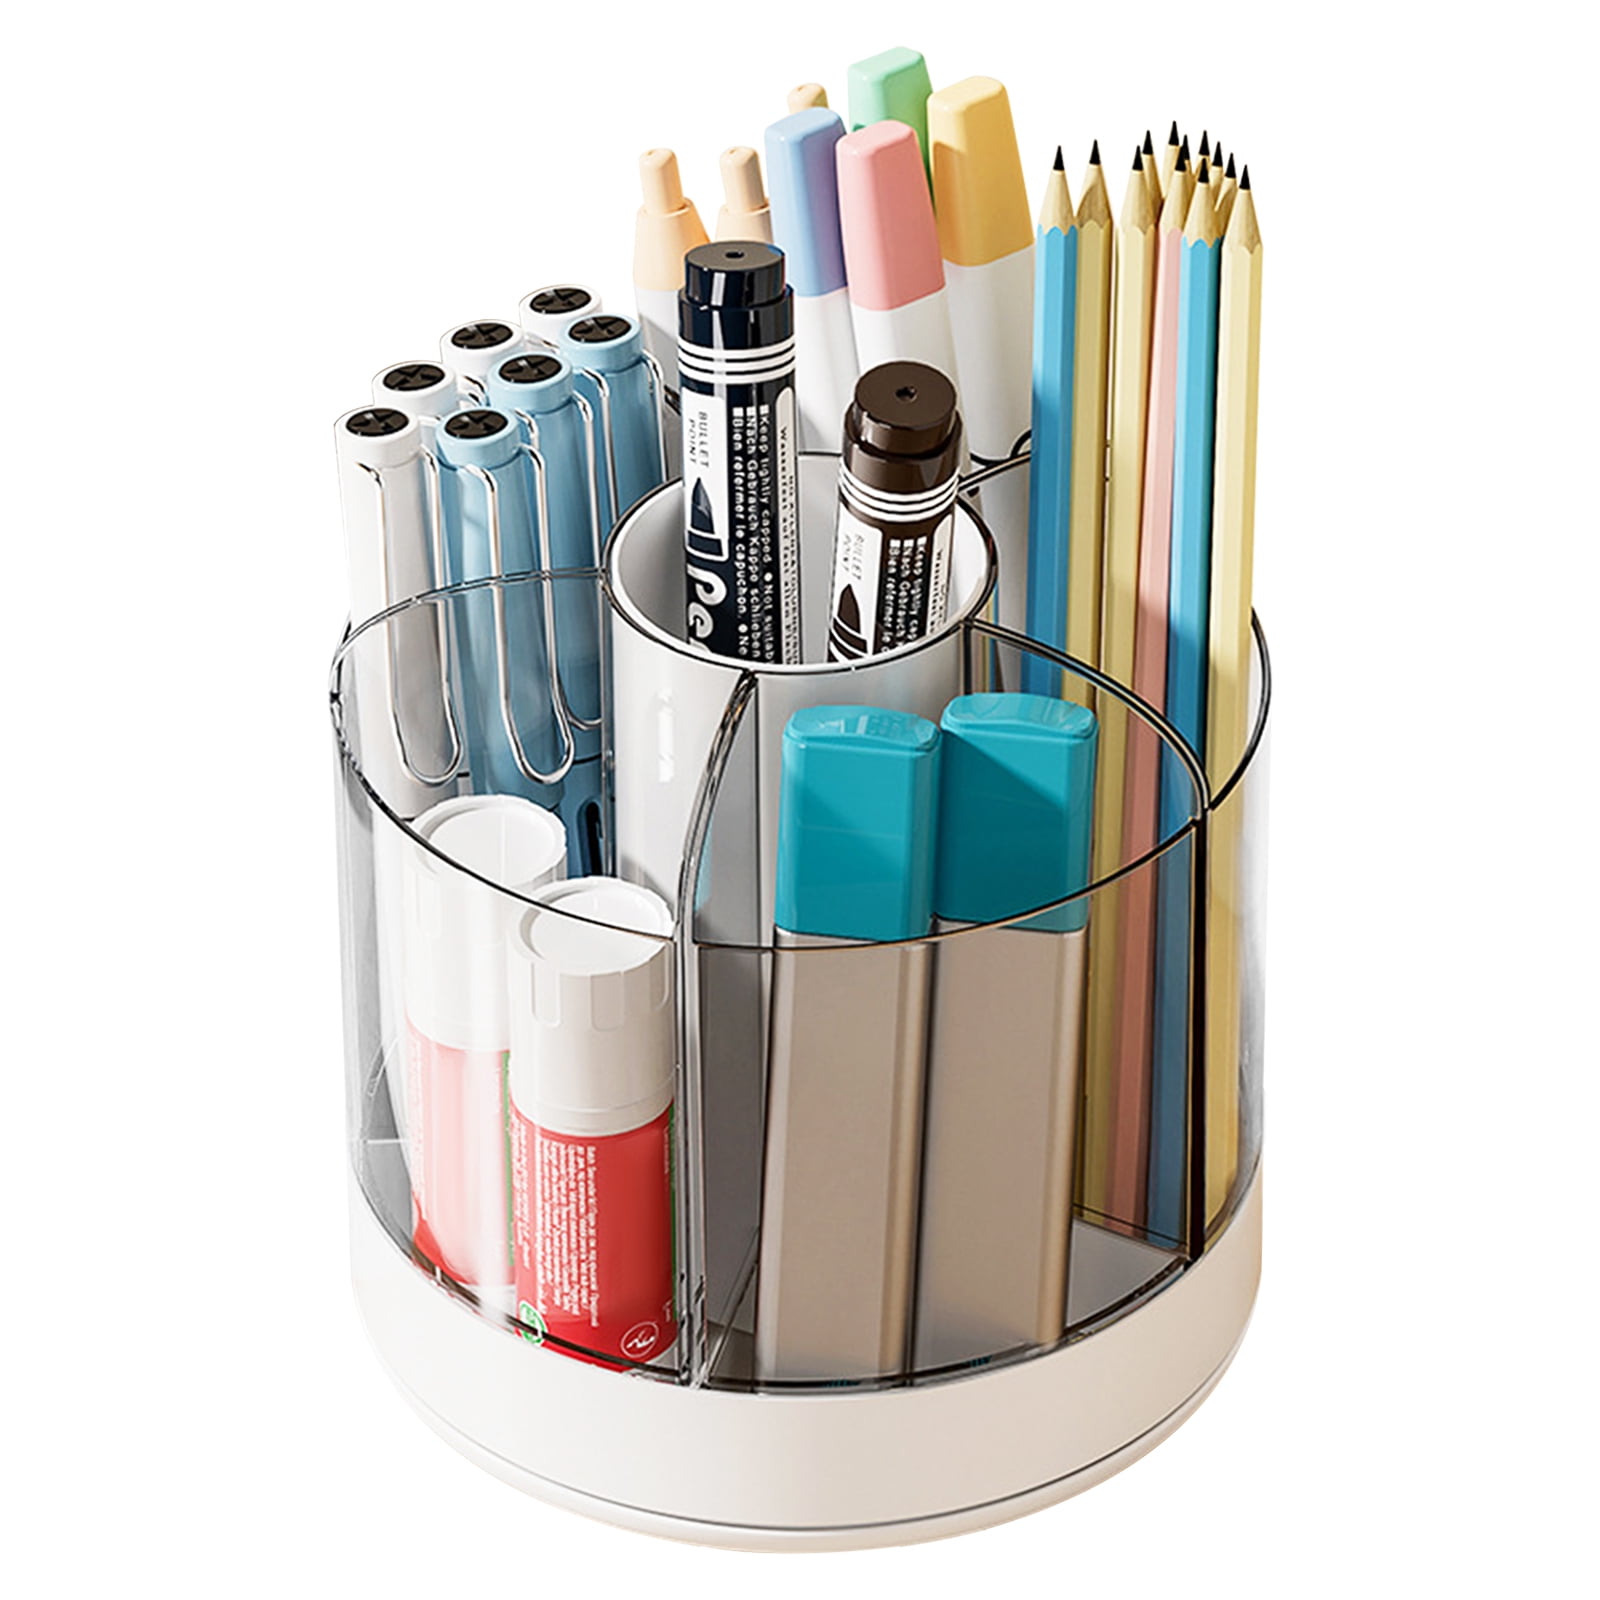 Pencil Holder - Turq. Shipping - Concept-1